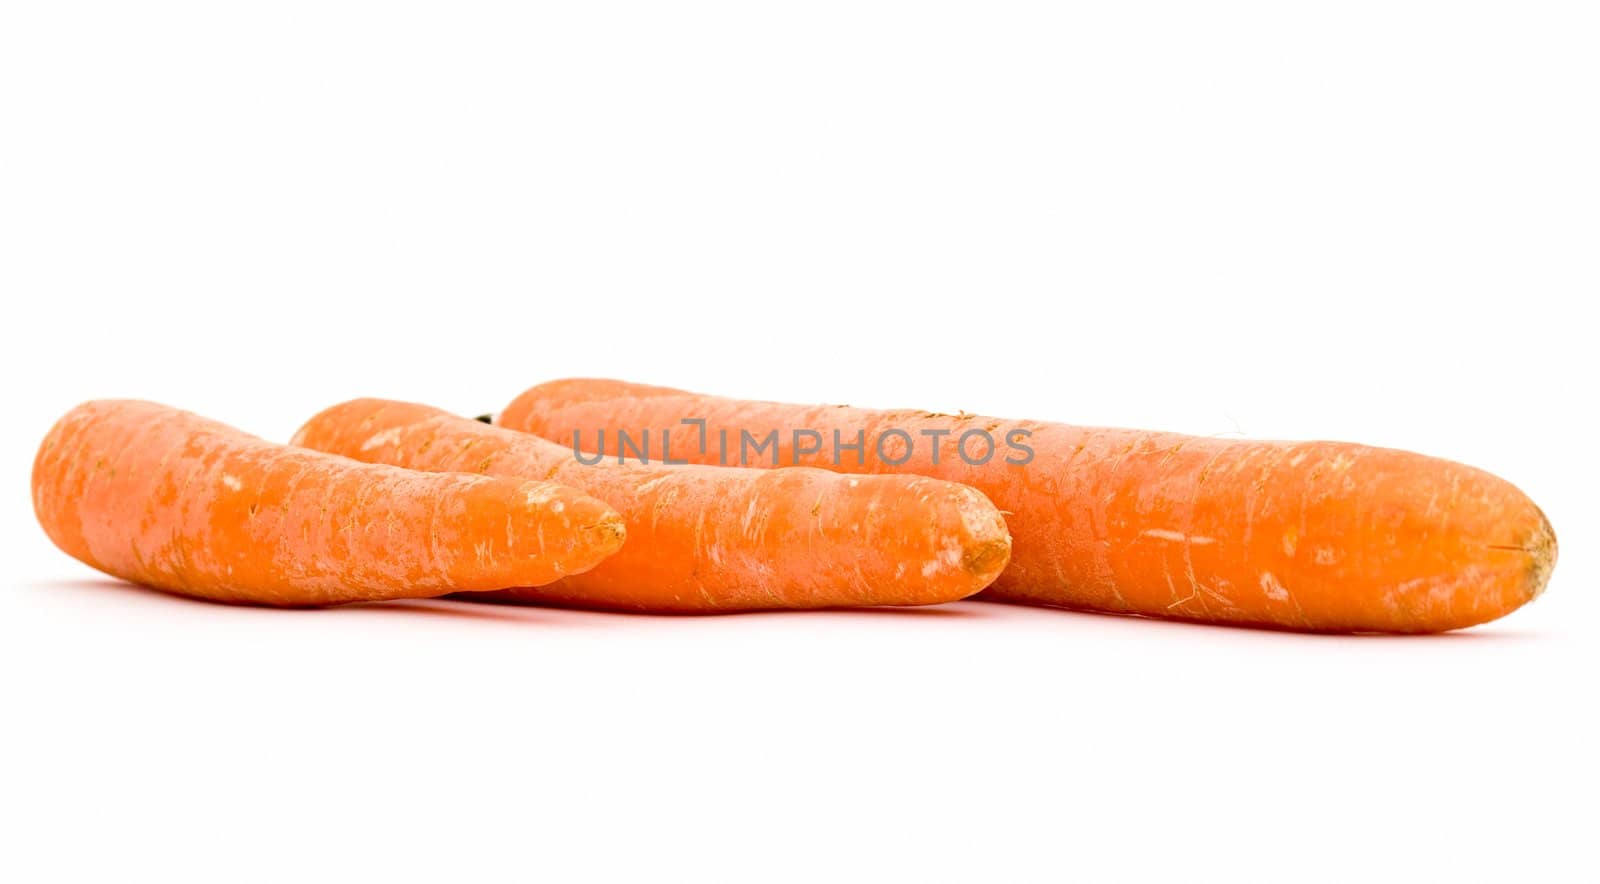 Three different carrots on a white background